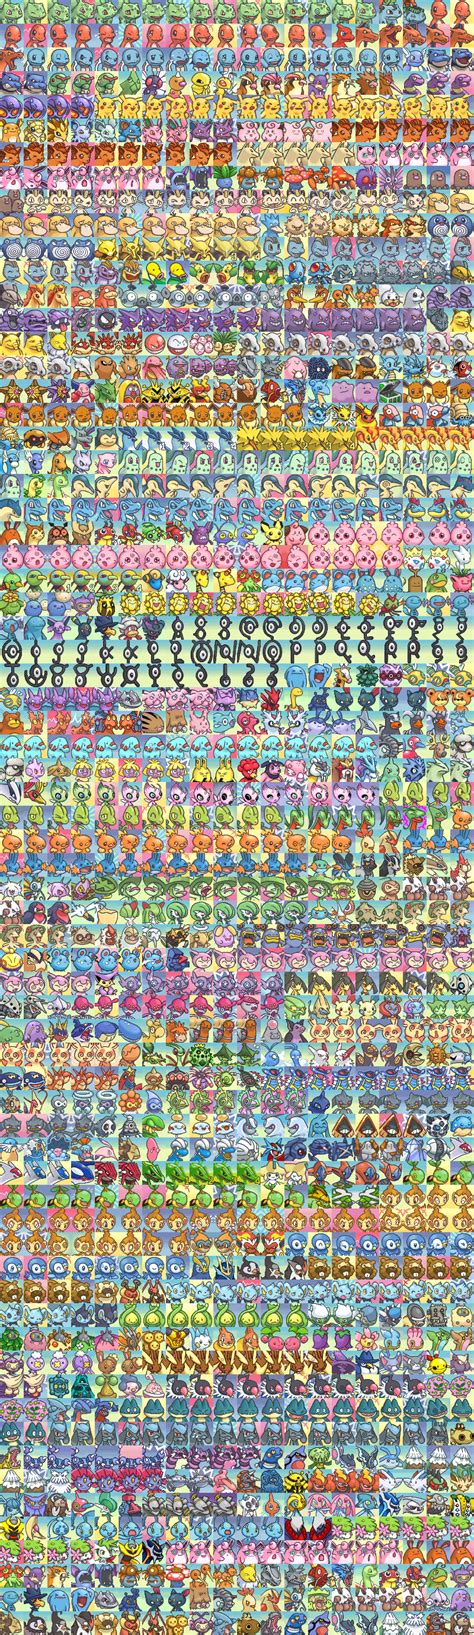 The Spriters Resource Full Sheet View Pokémon Mystery Dungeon